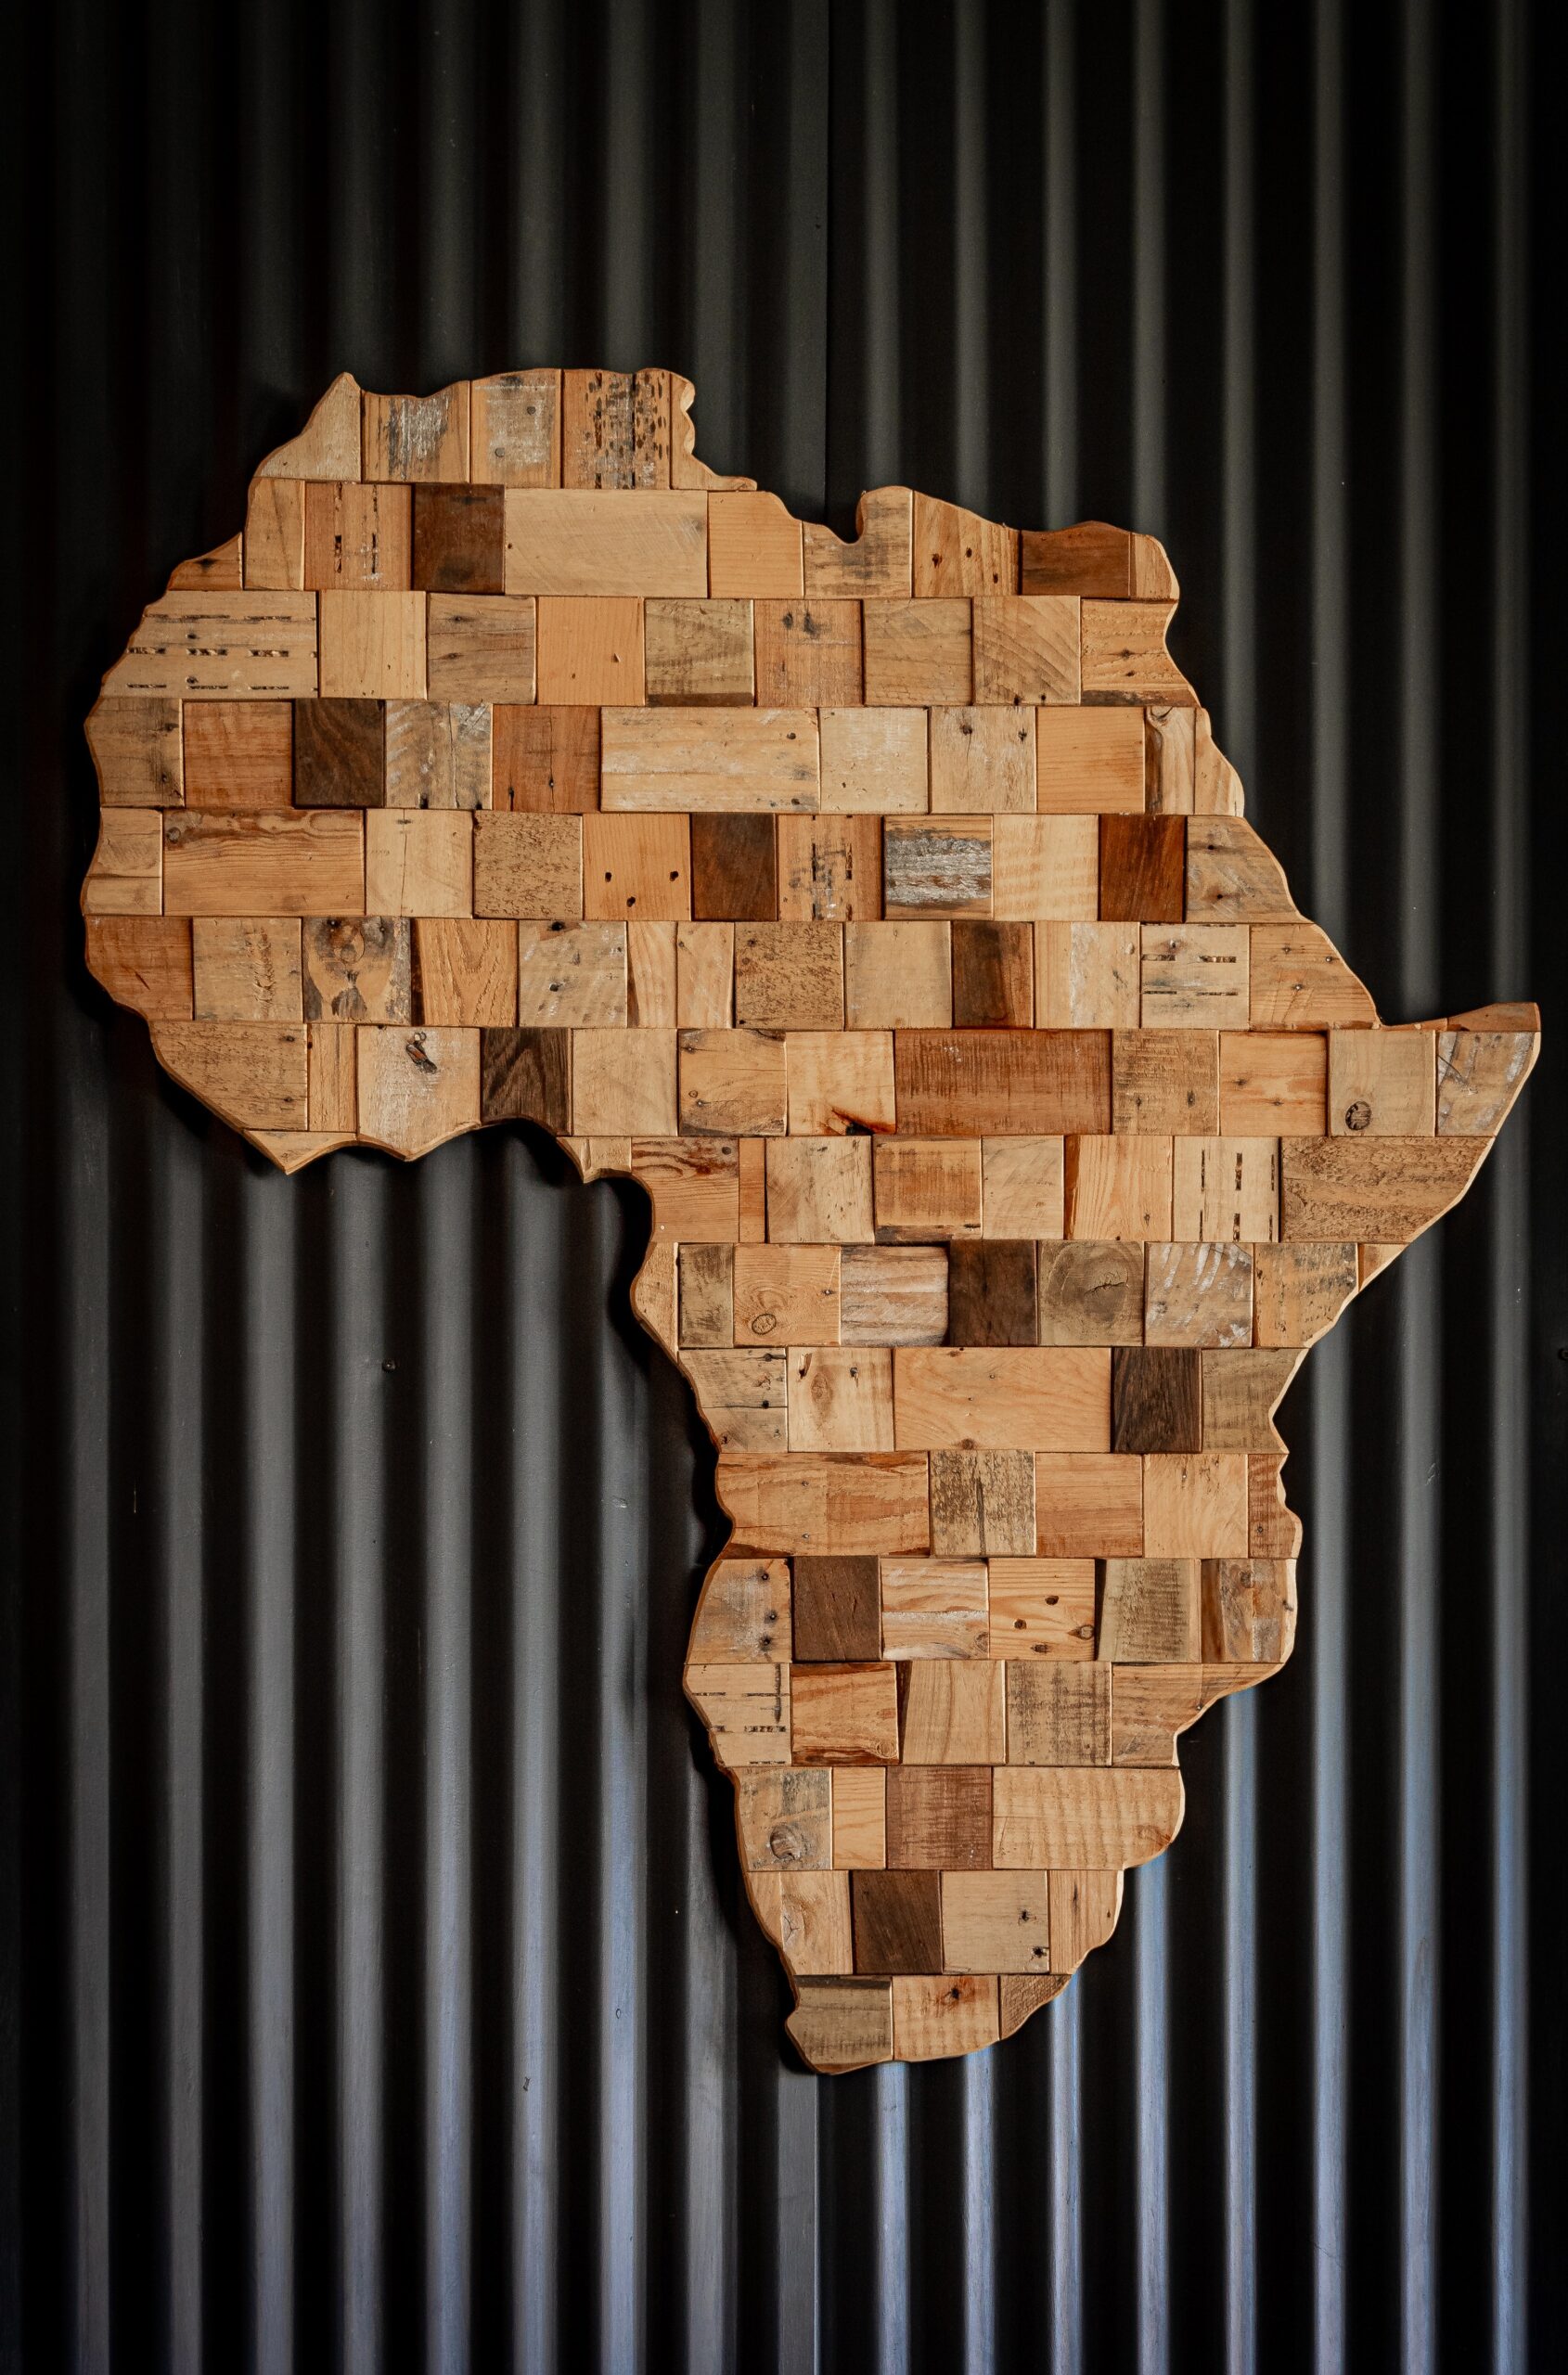 Africa is bigger than China, USA, India, Mexico: Black History month focus on Africa